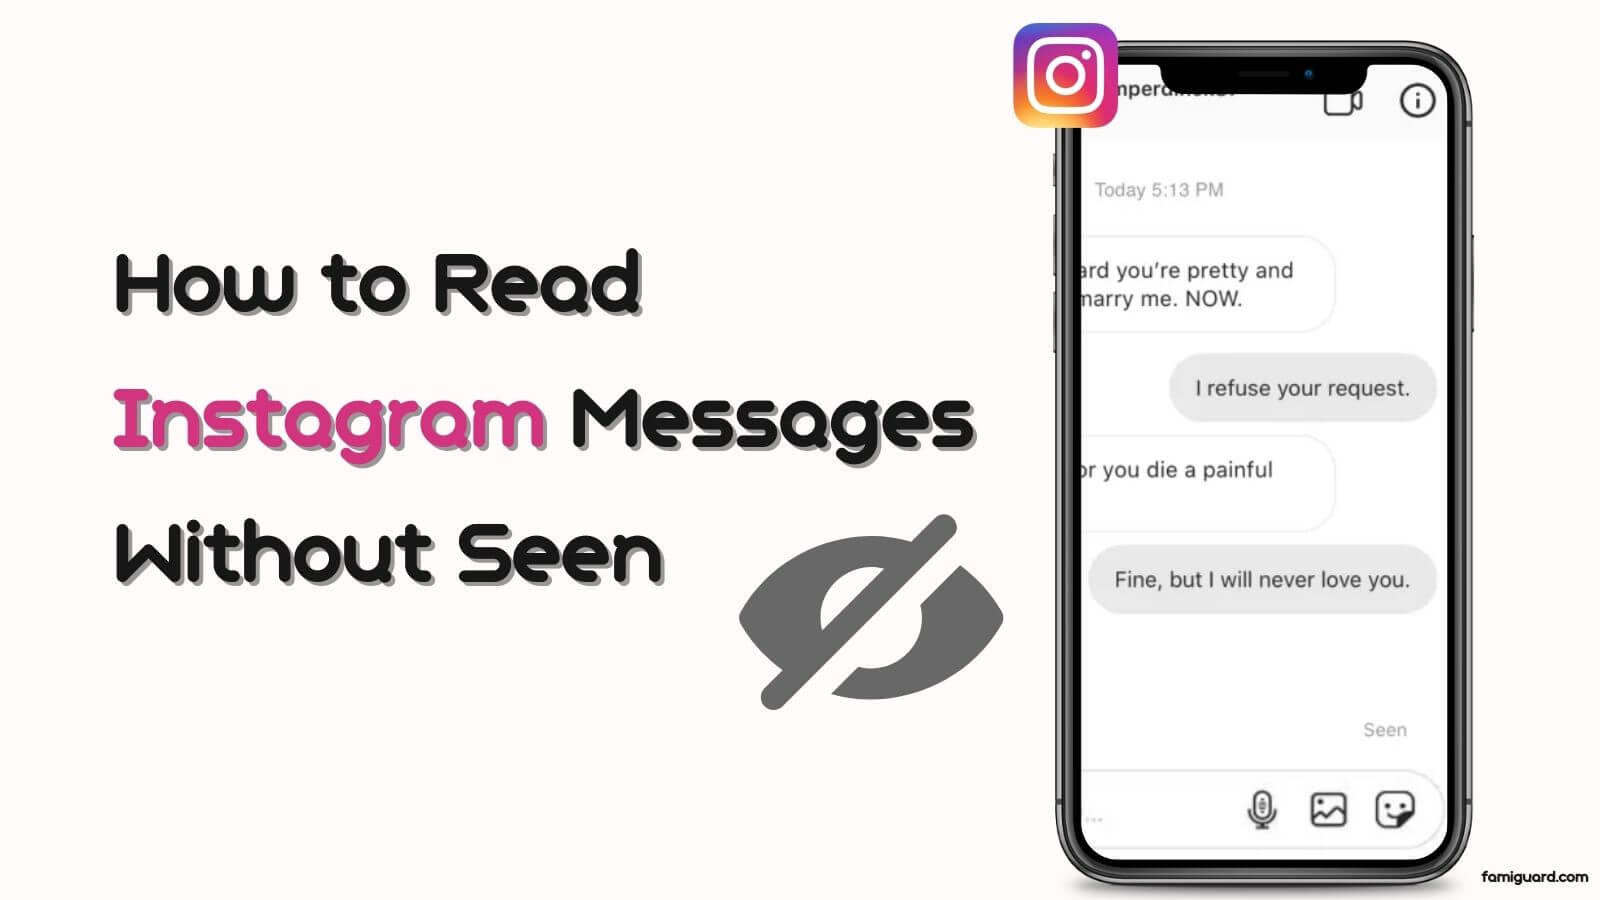 how to read Instagram messages without being seen